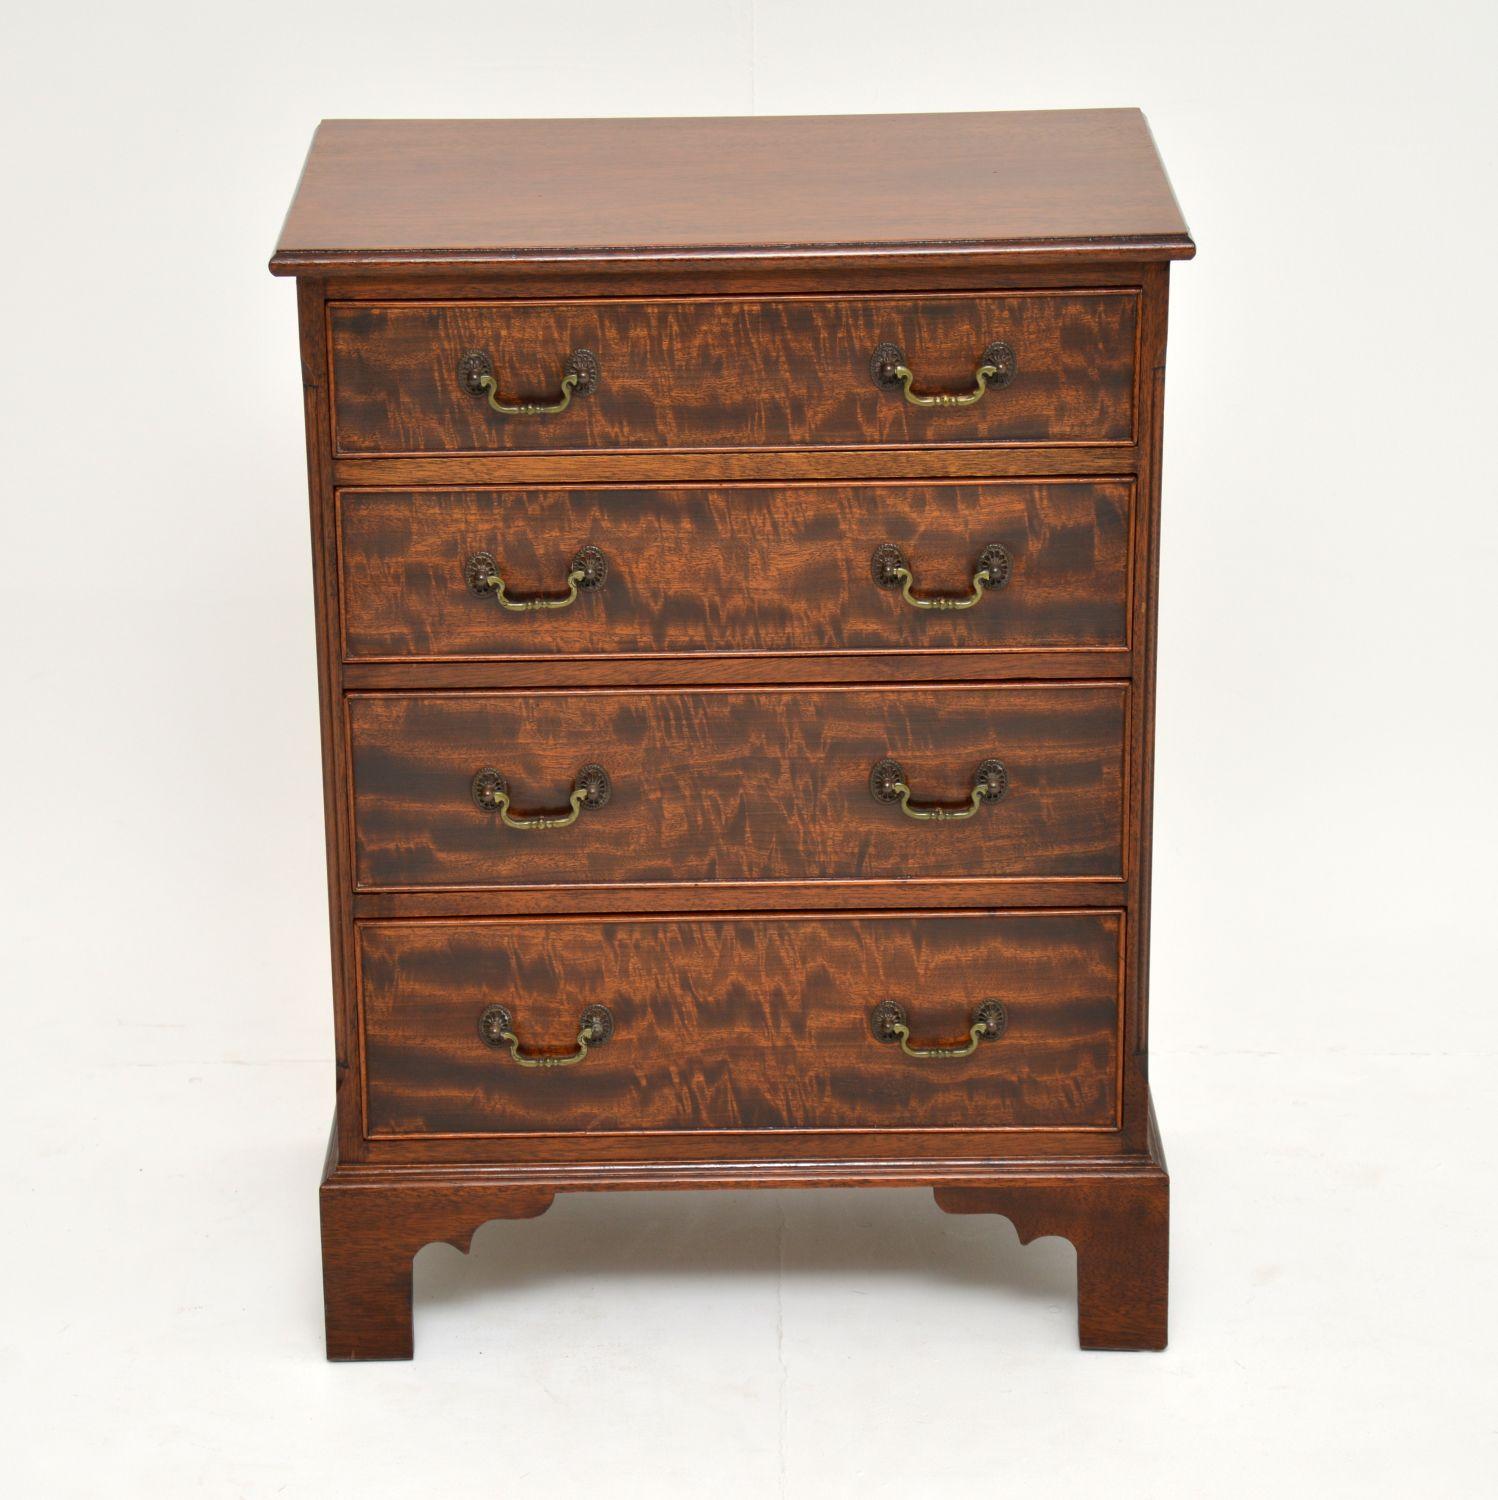 Small antique George III style mahogany chest of drawers in excellent condition and dating from circa 1950s period.

It’s a nice solidly made piece with four drawers all graduated in depth with original brass handles and sitting on bracket